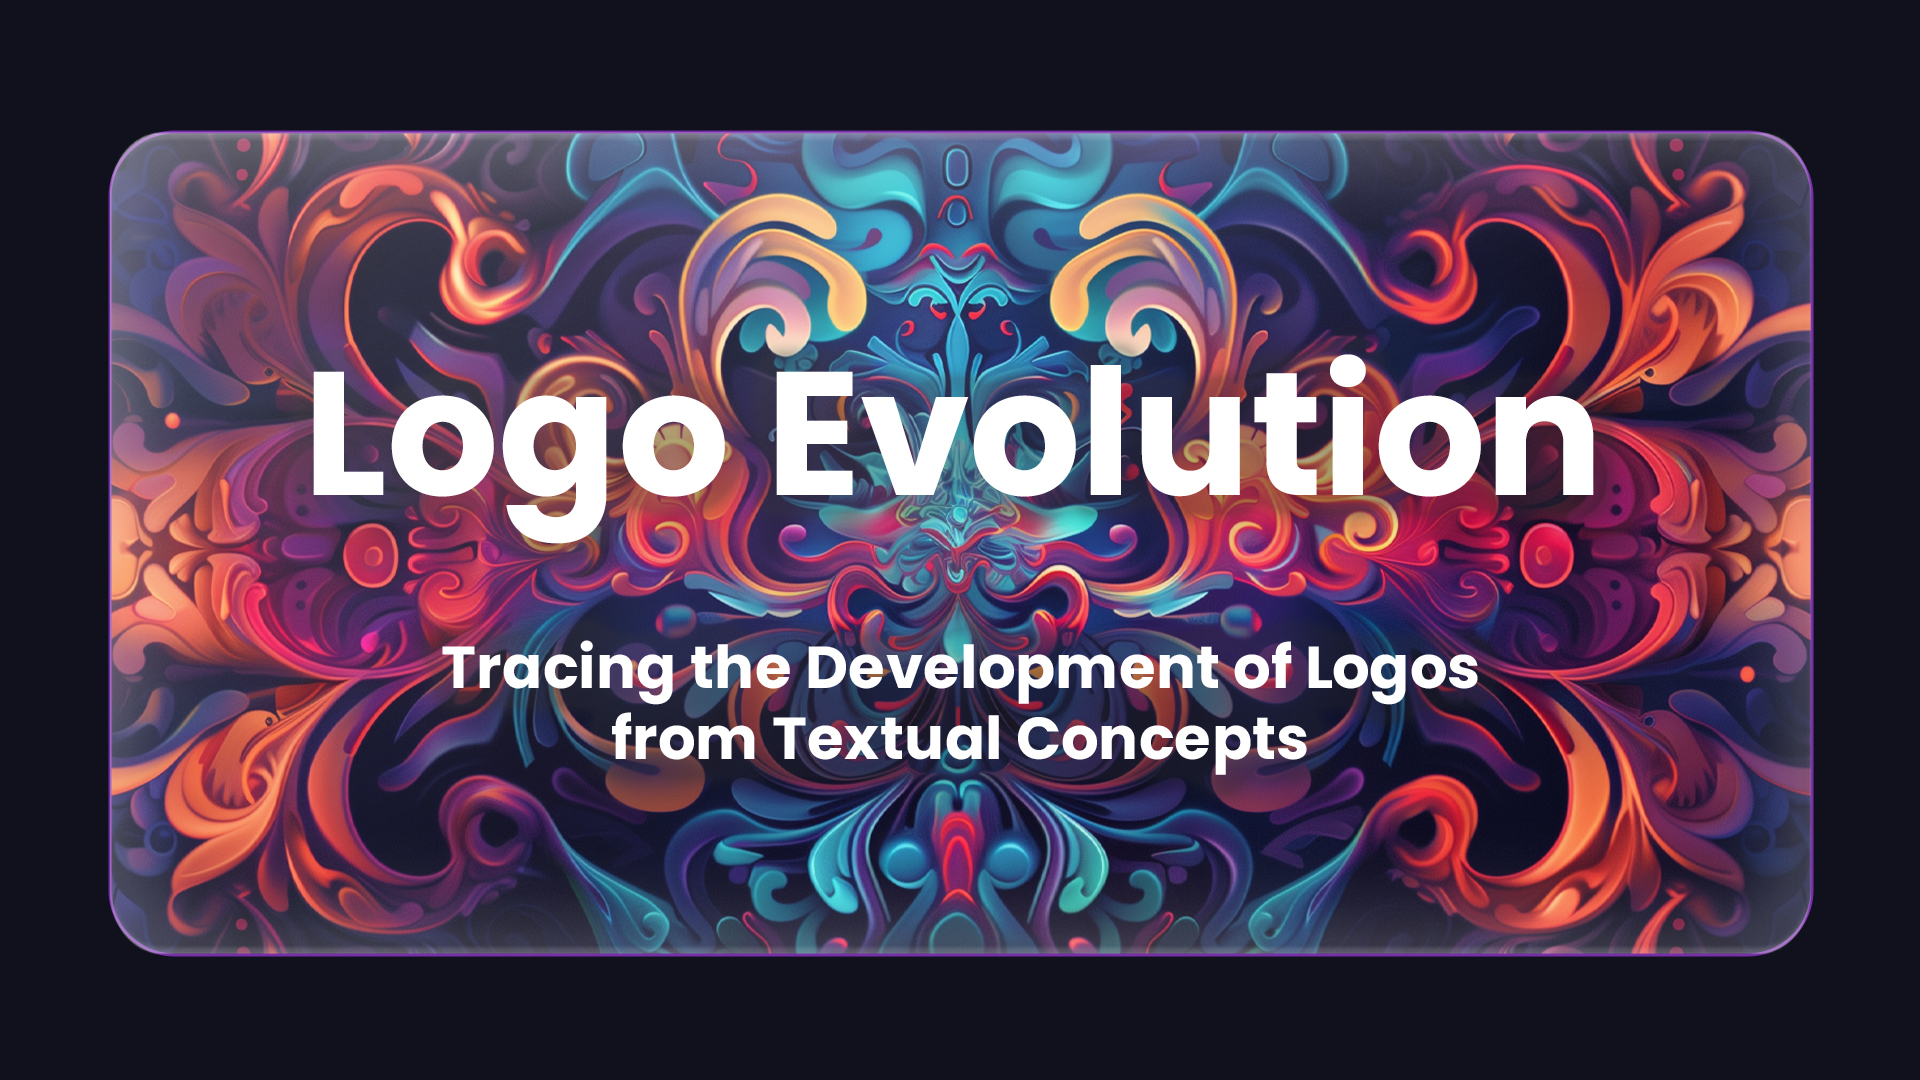 Logo Evolution: Tracing the Development of Logos from Textual Concepts